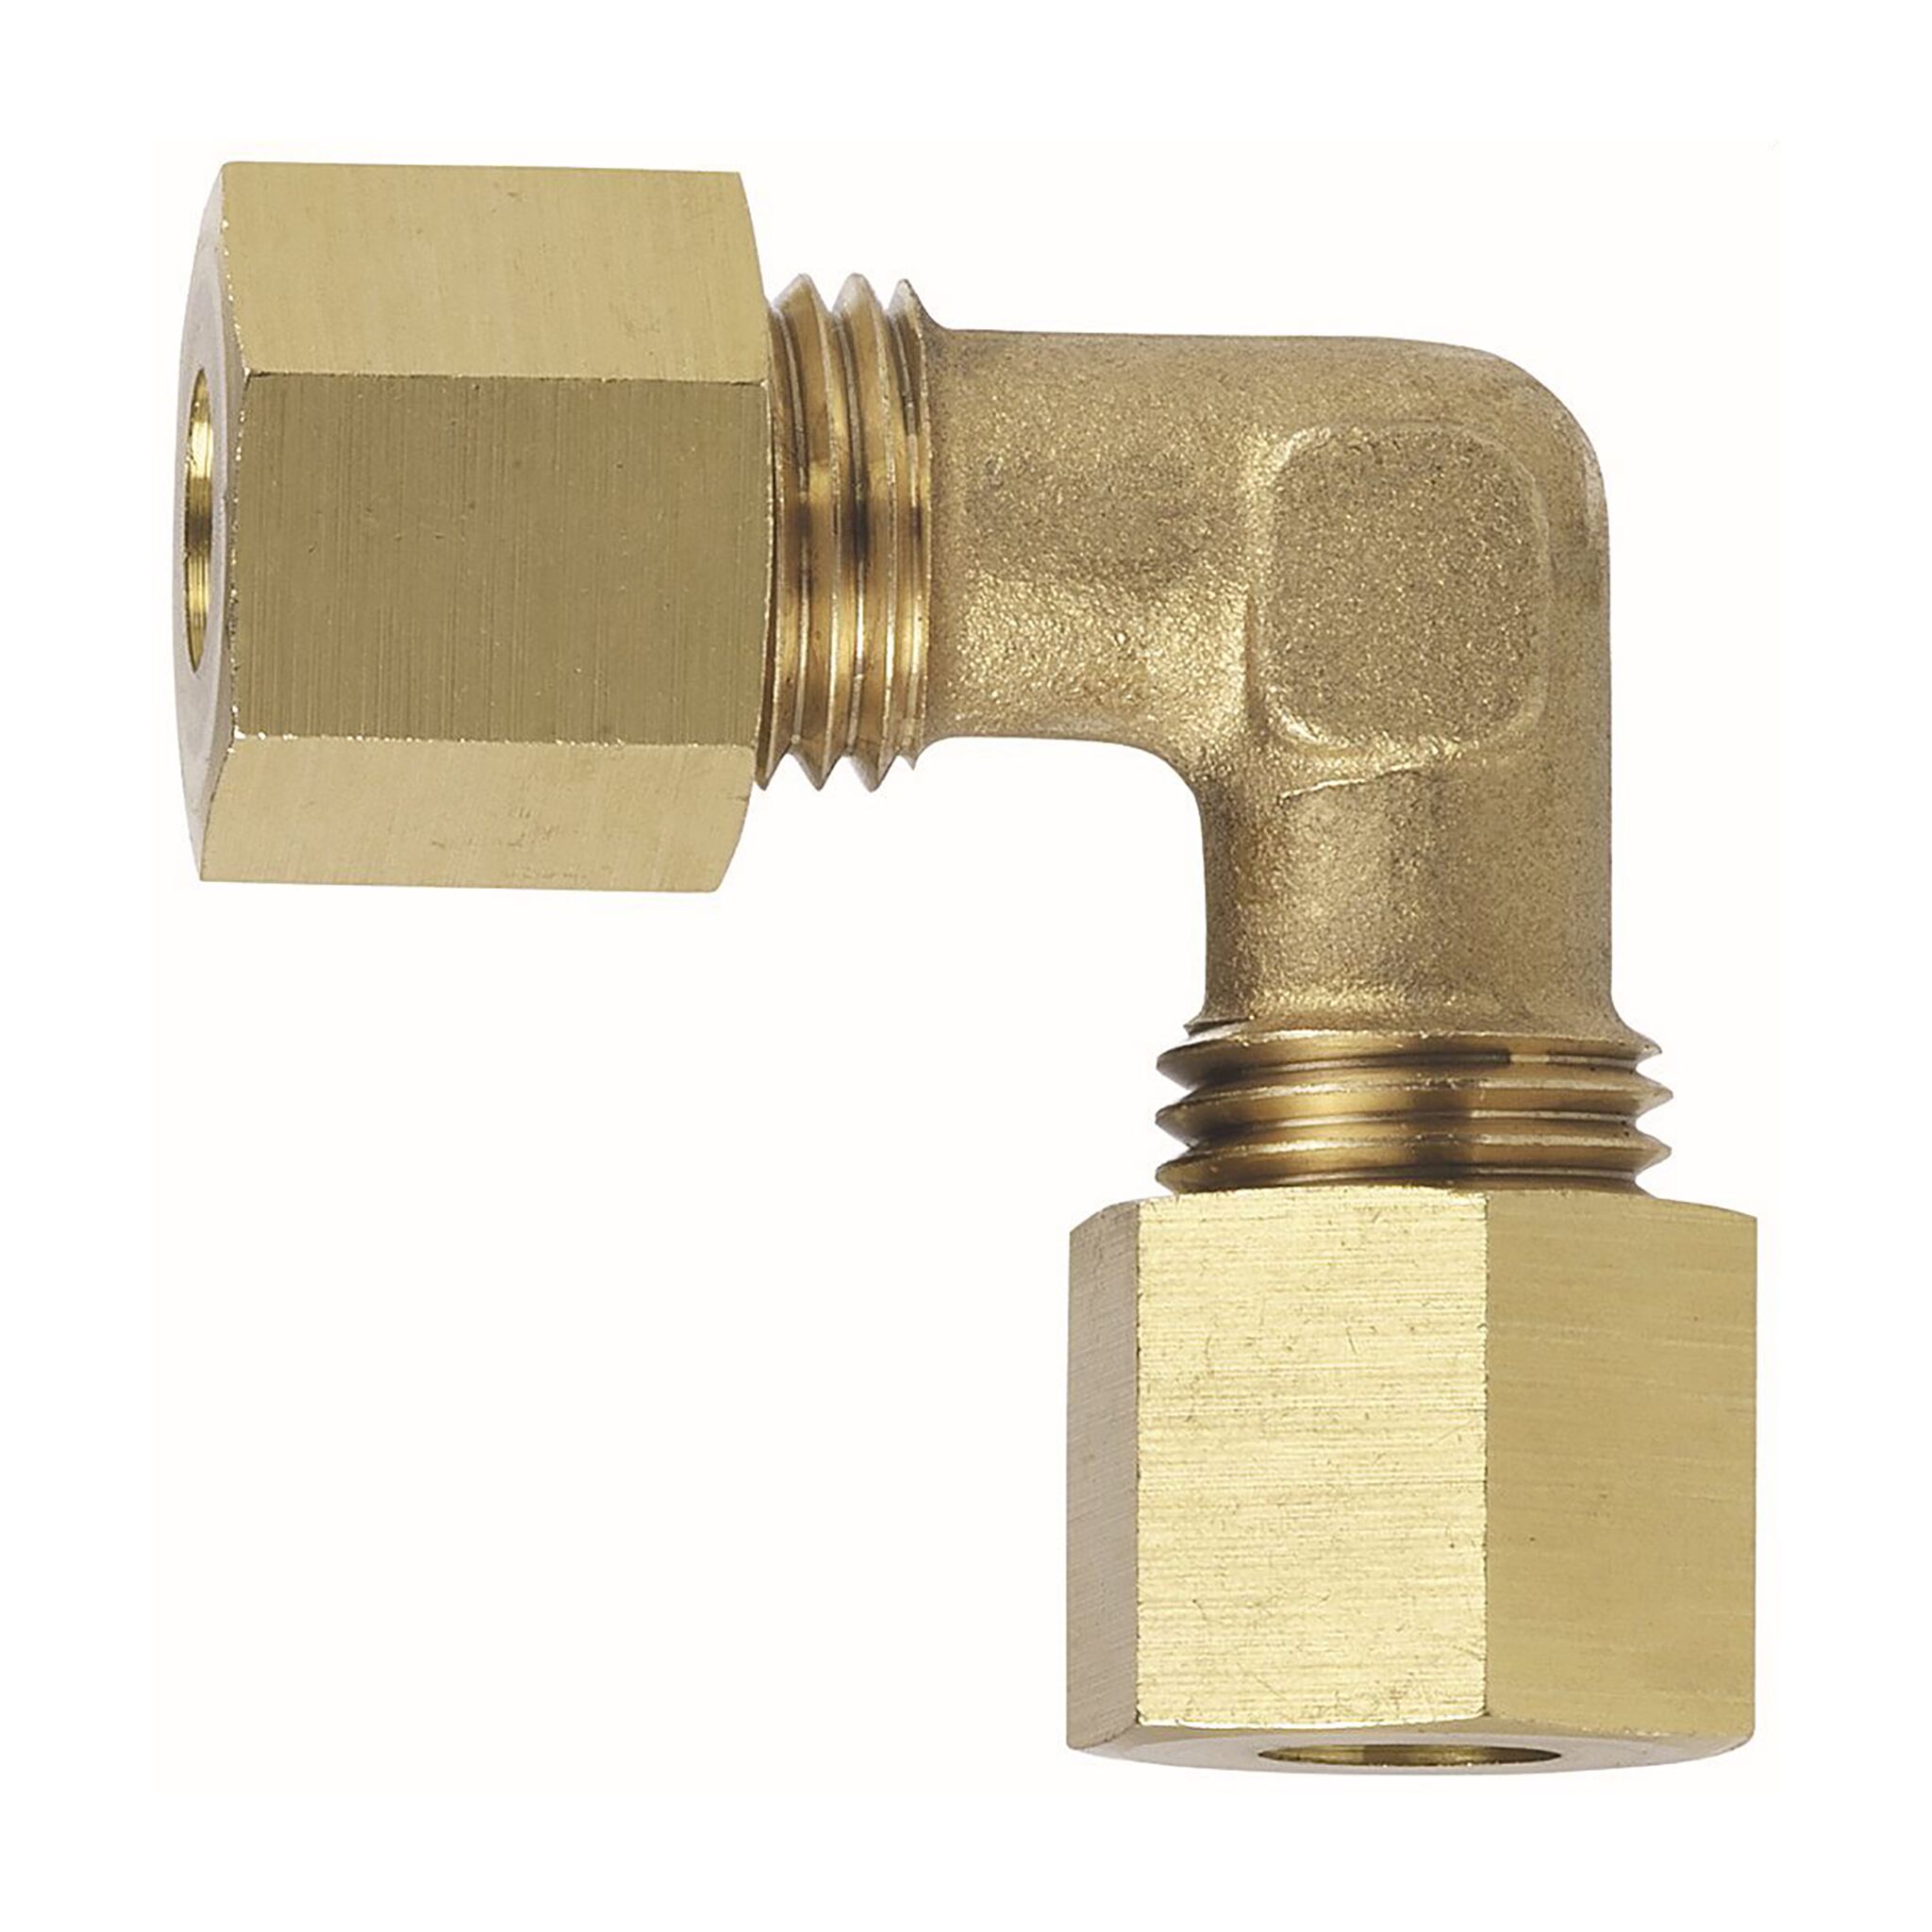 Fittings for gas connection